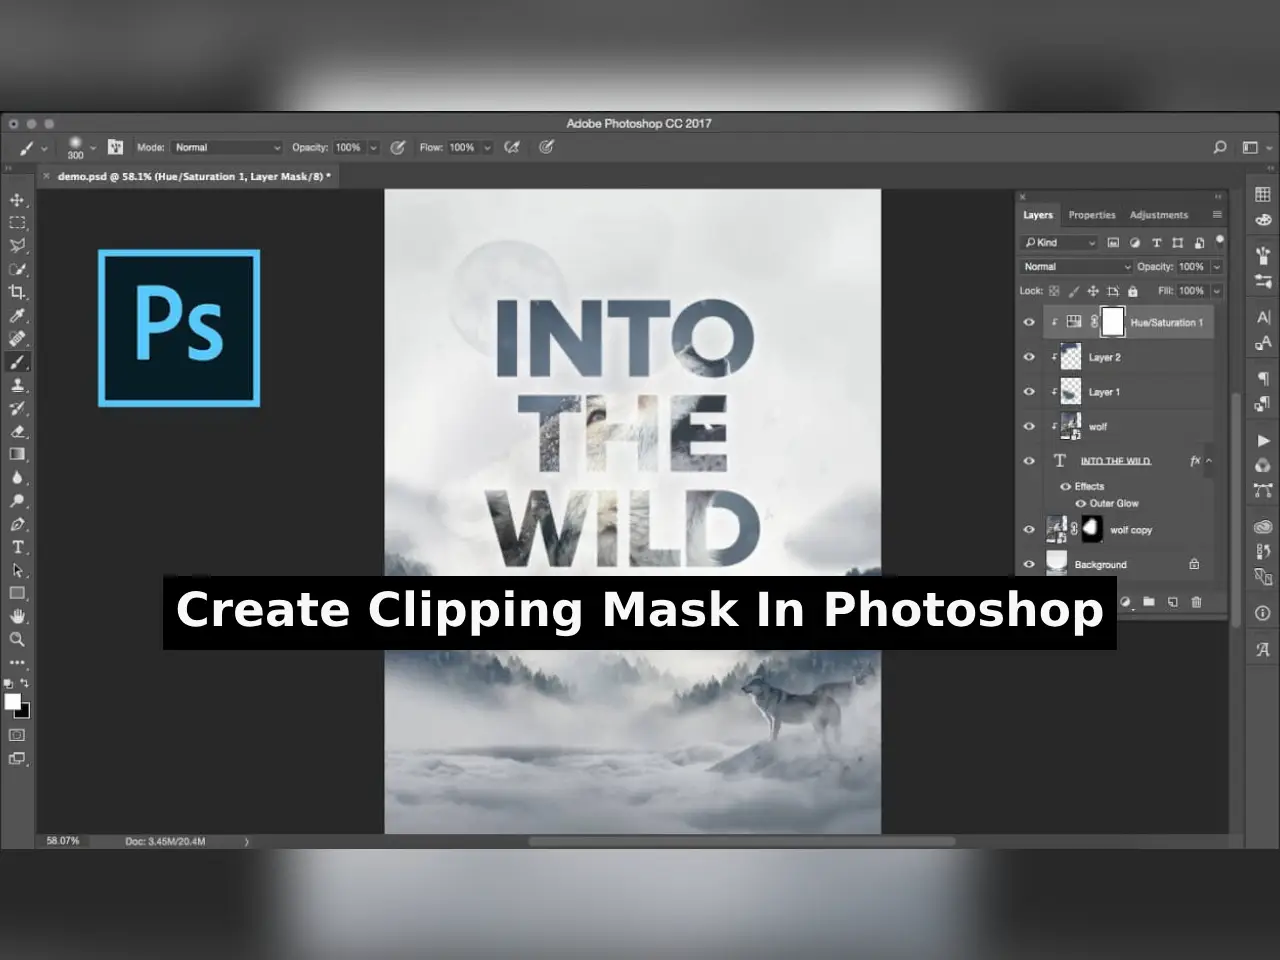 How to Create Clipping Mask Photoshop